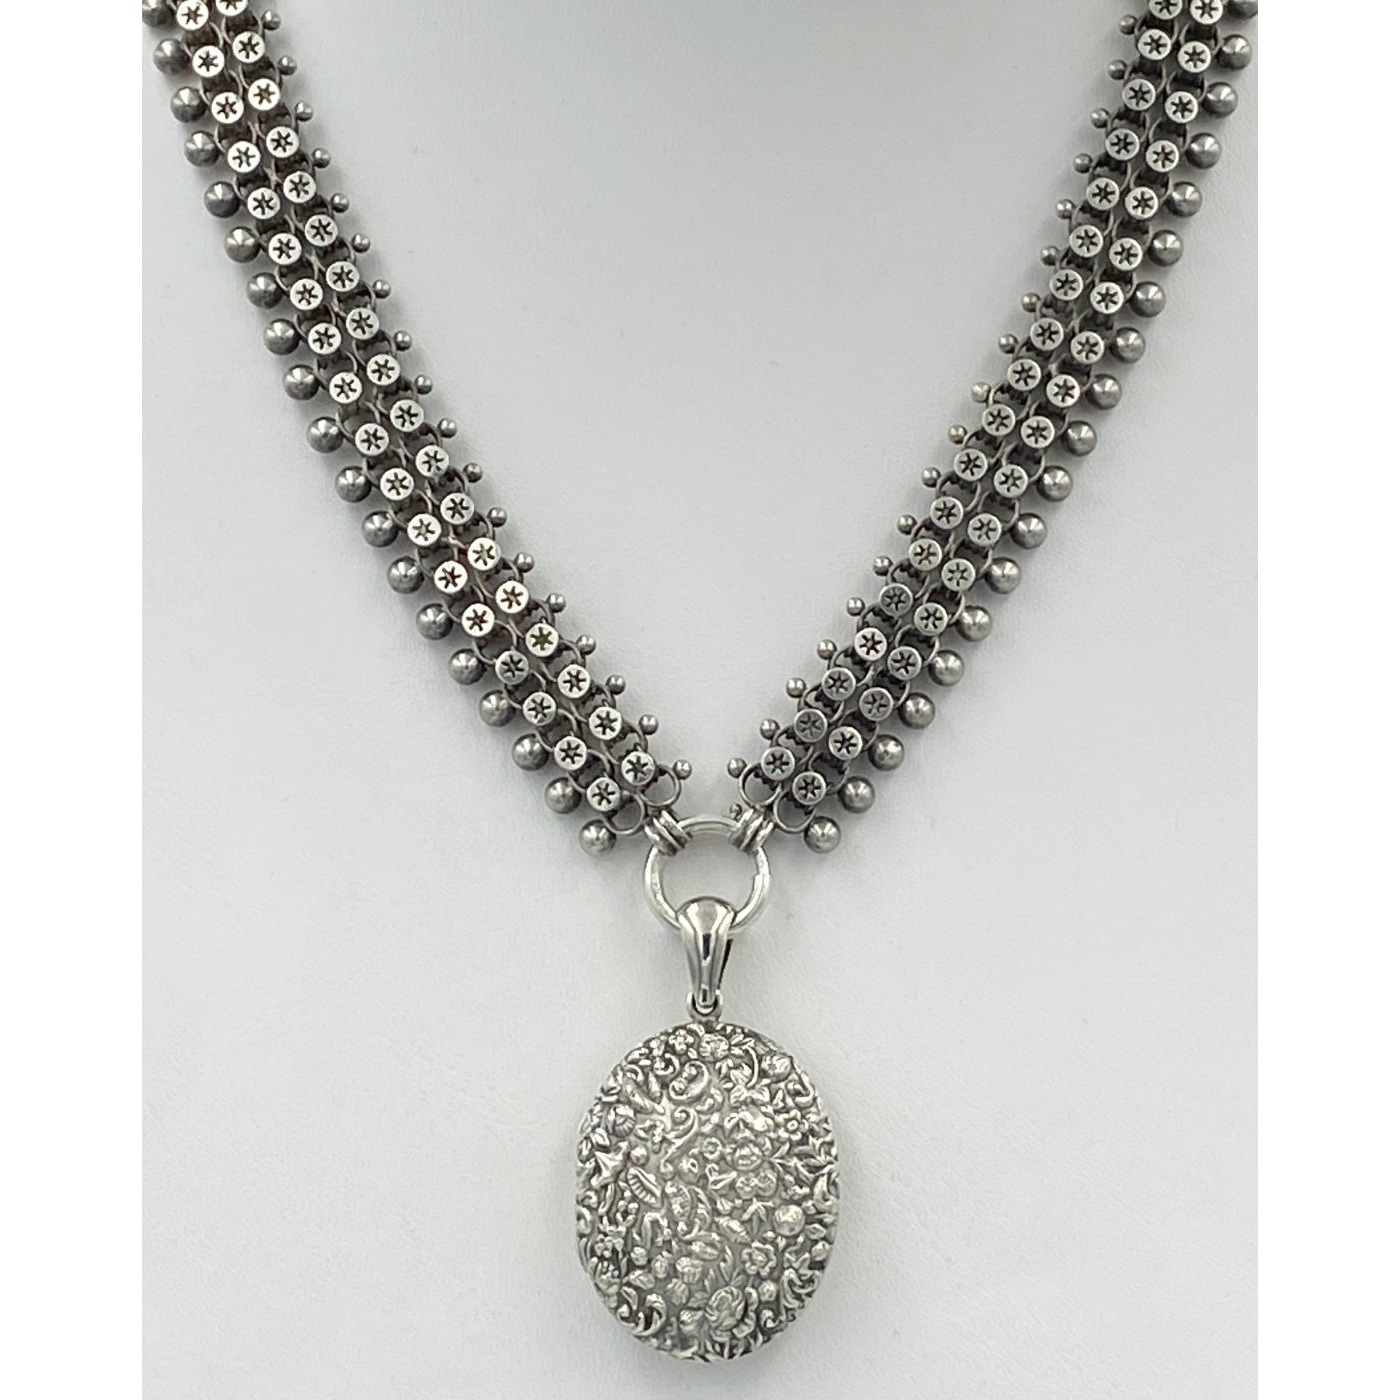 Wonderfully Wide Beaded, Double Cannonballs, Star Link Antique English Silver Chain - Chain Only